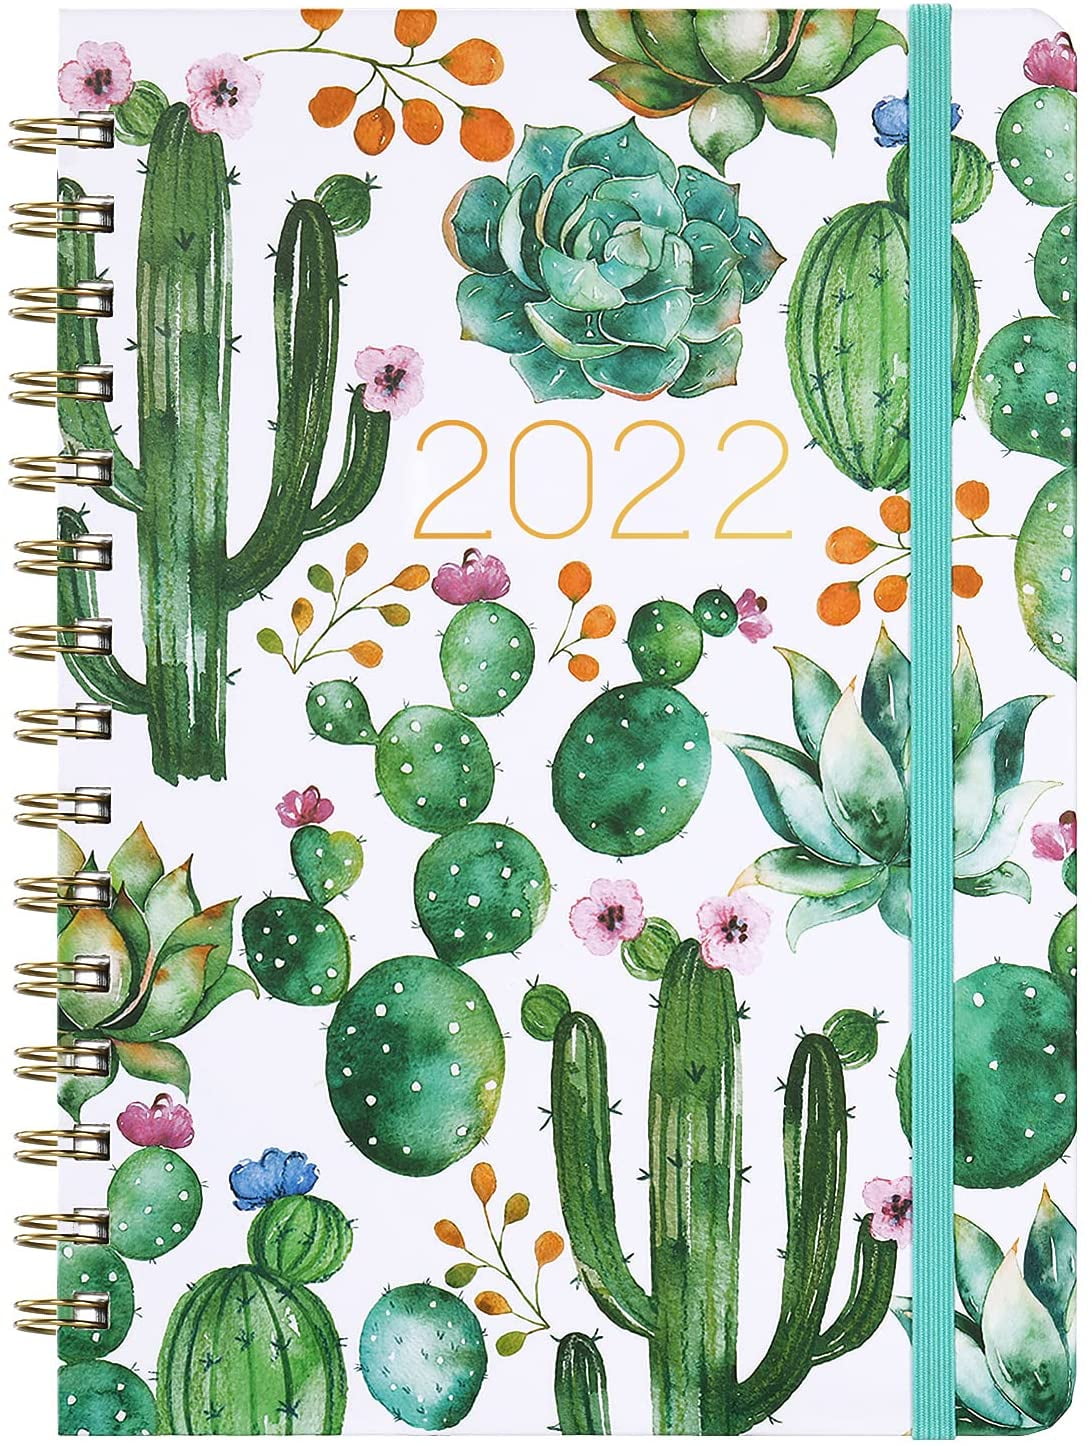 Flexible Hardcover 2022 Weekly Monthly Planner Jan 2022 Wire Binding Dec 2022 Strong Twin Inner Pocket Elastic Closure Coated Tabs Thick Paper 2022 Planner 8.5 x 6.4